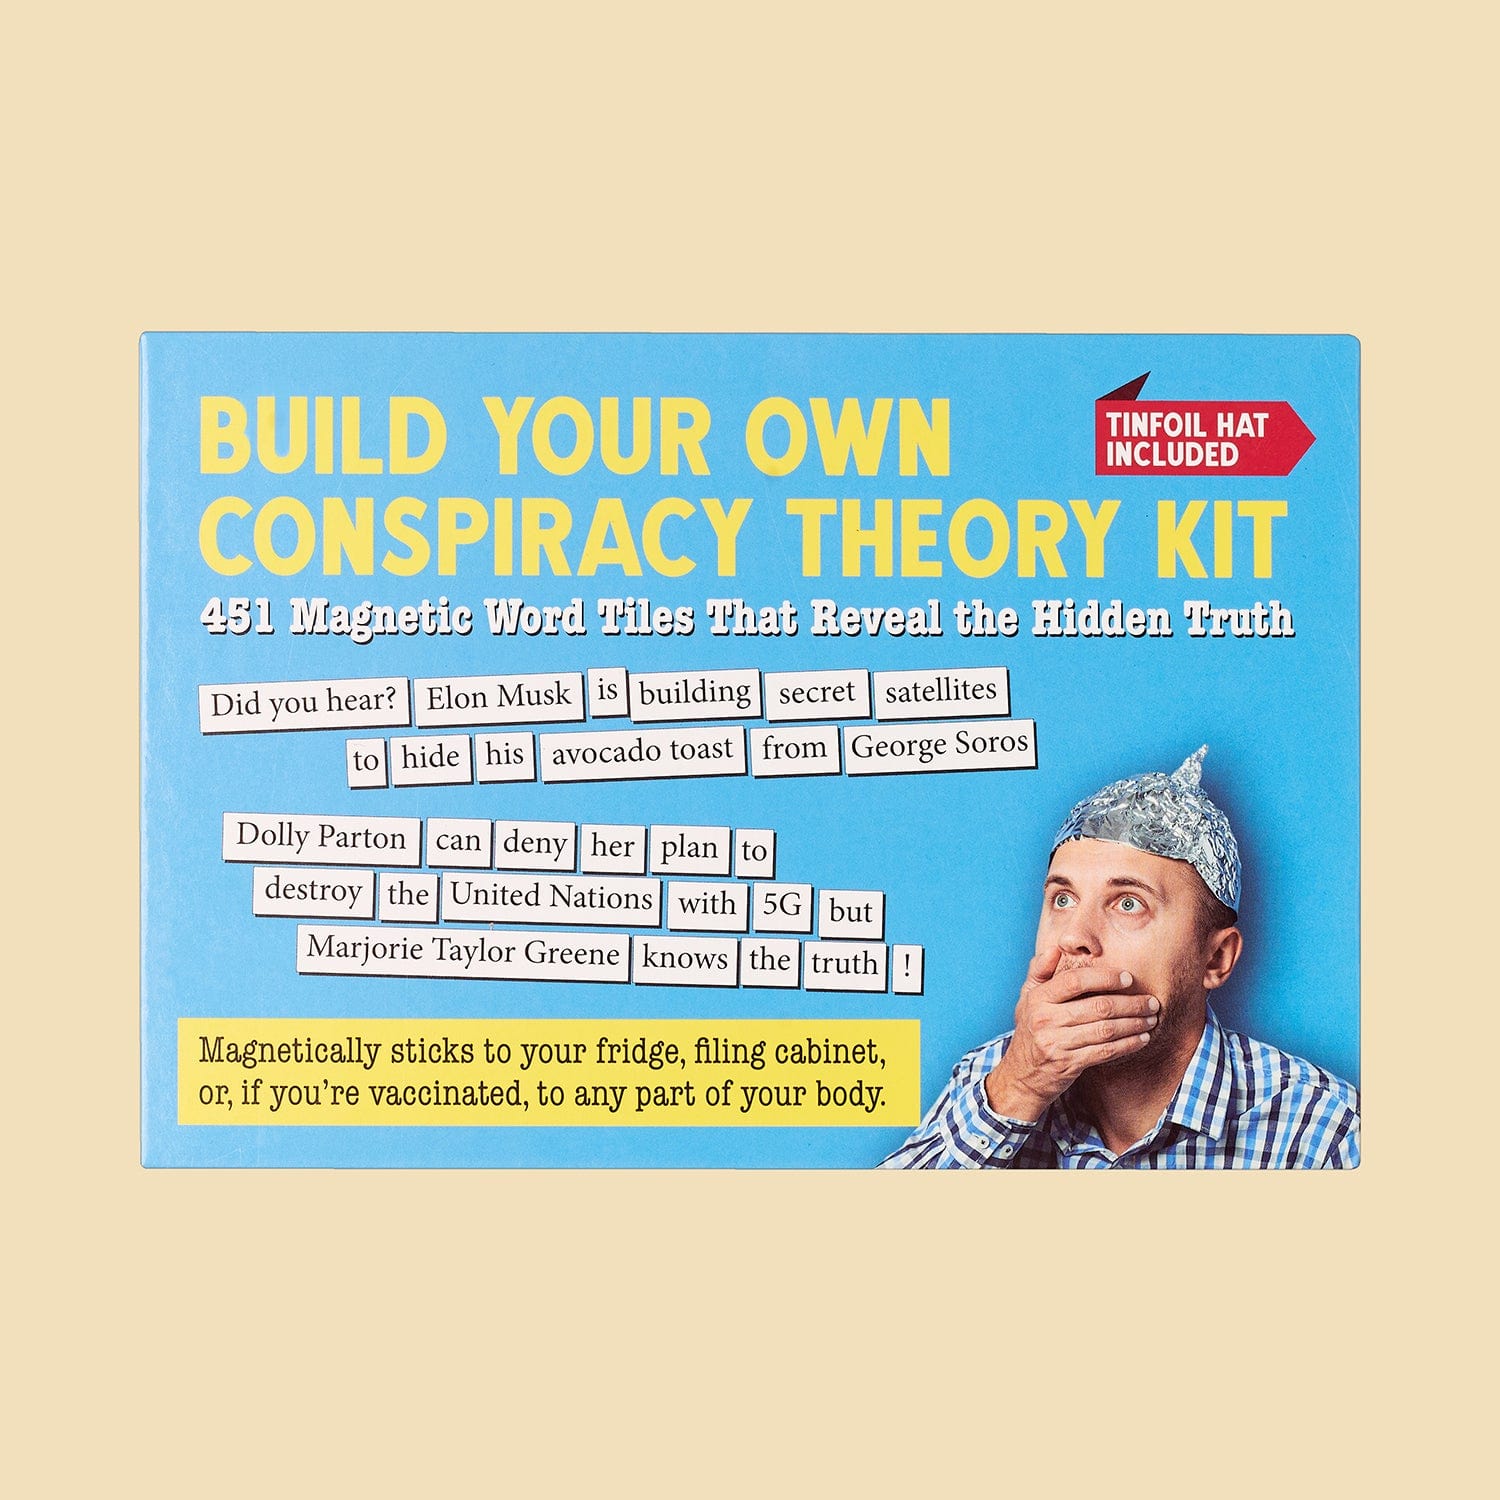 Build Your Own Conspiracy Theory Kit